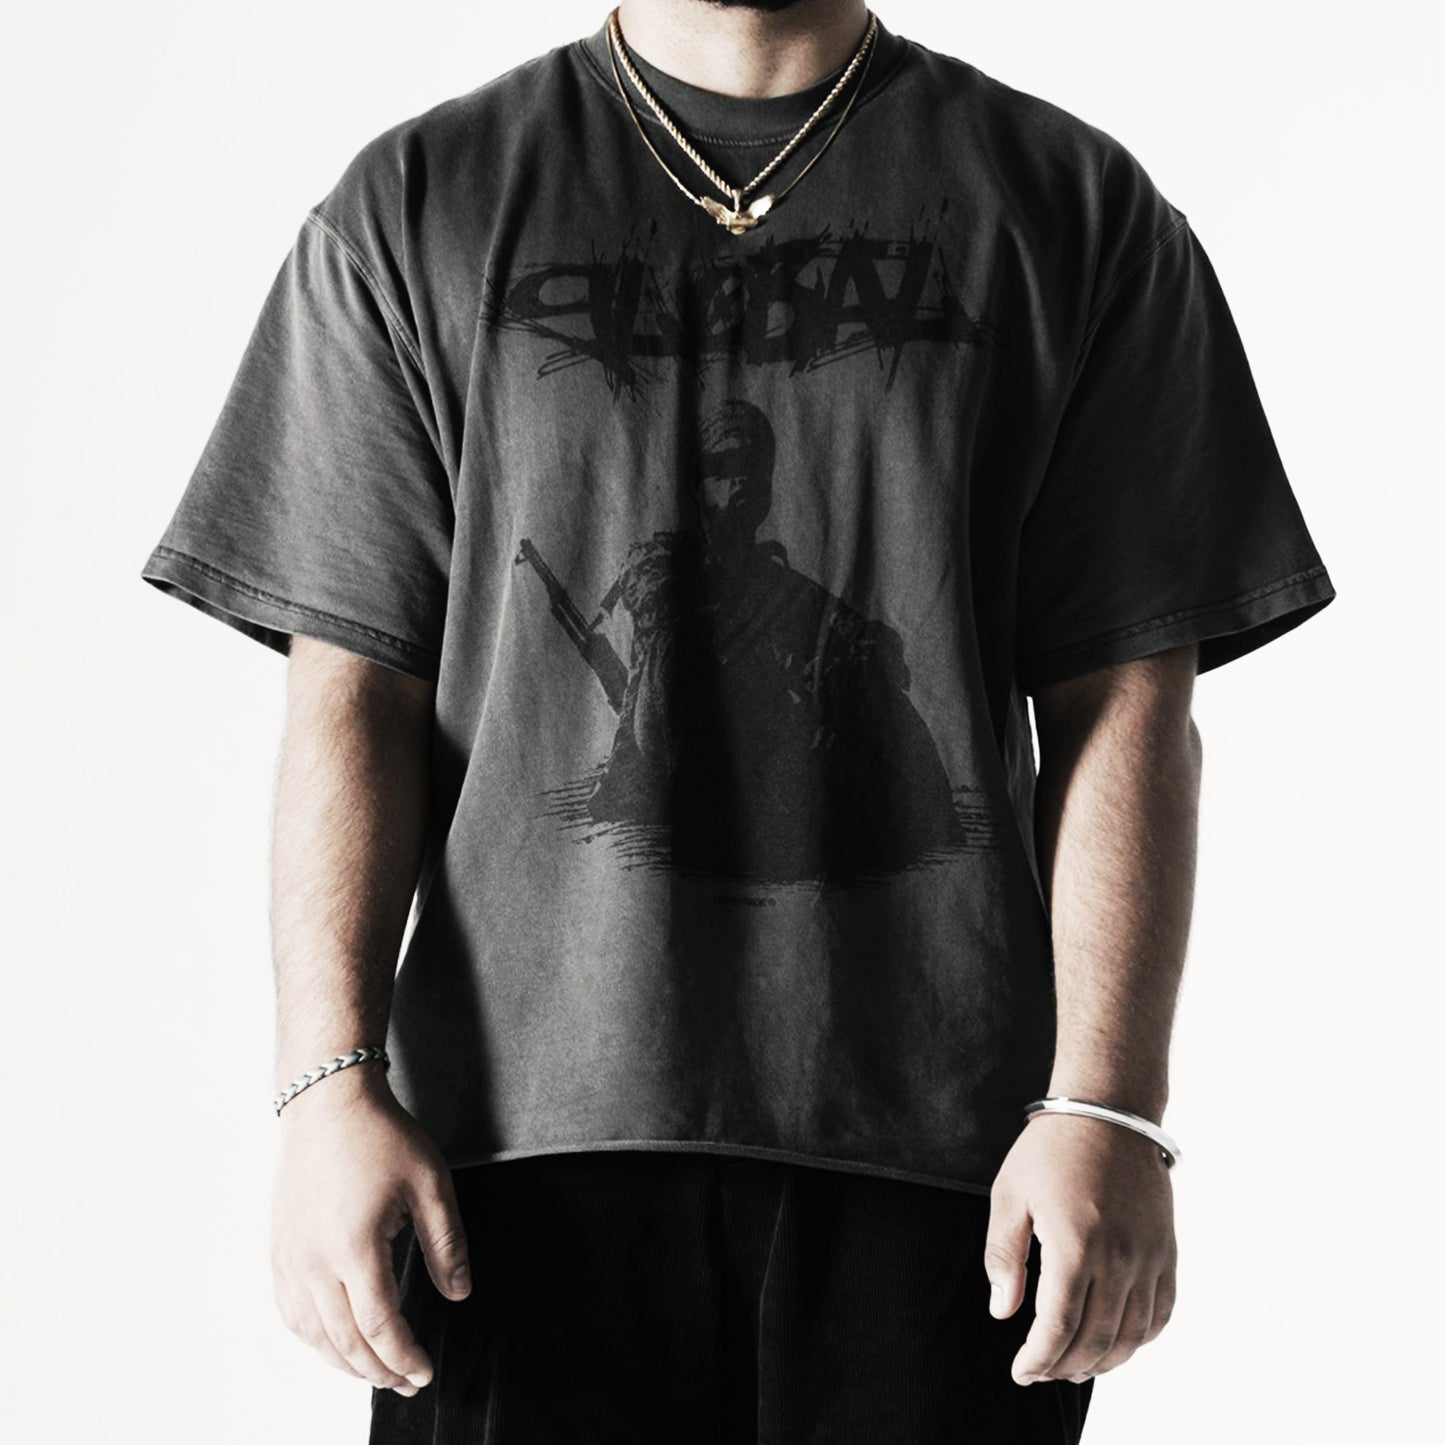 GLOBAL CONFLICT OVERSIZED FADED T-SHIRT DARK GREY